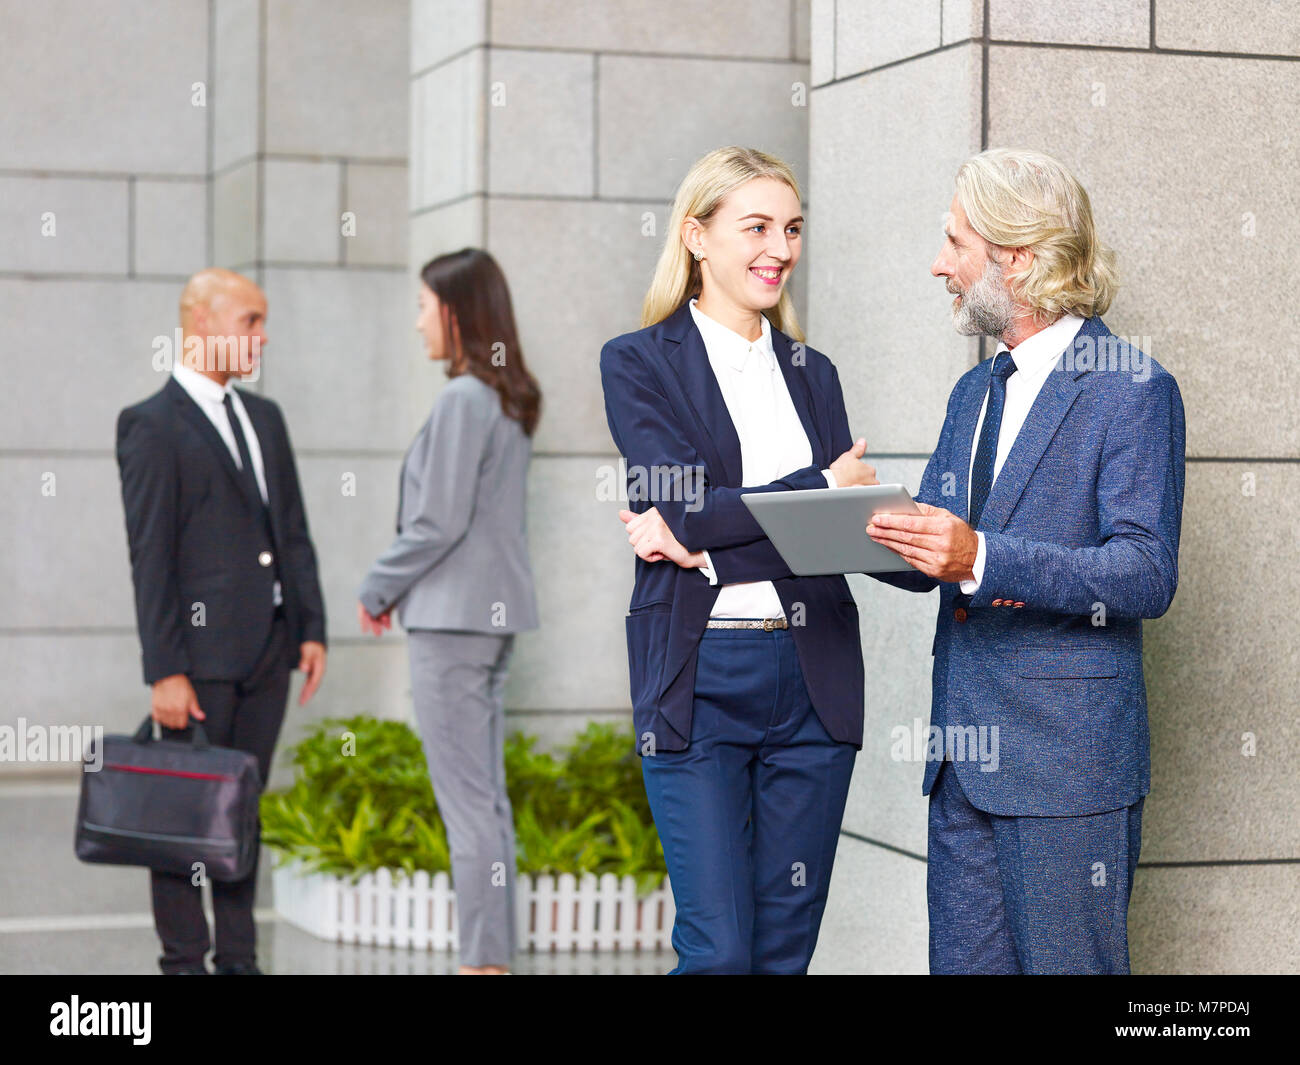 caucasian corporate executives standing discussing business using digital tablet in modern building. Stock Photo